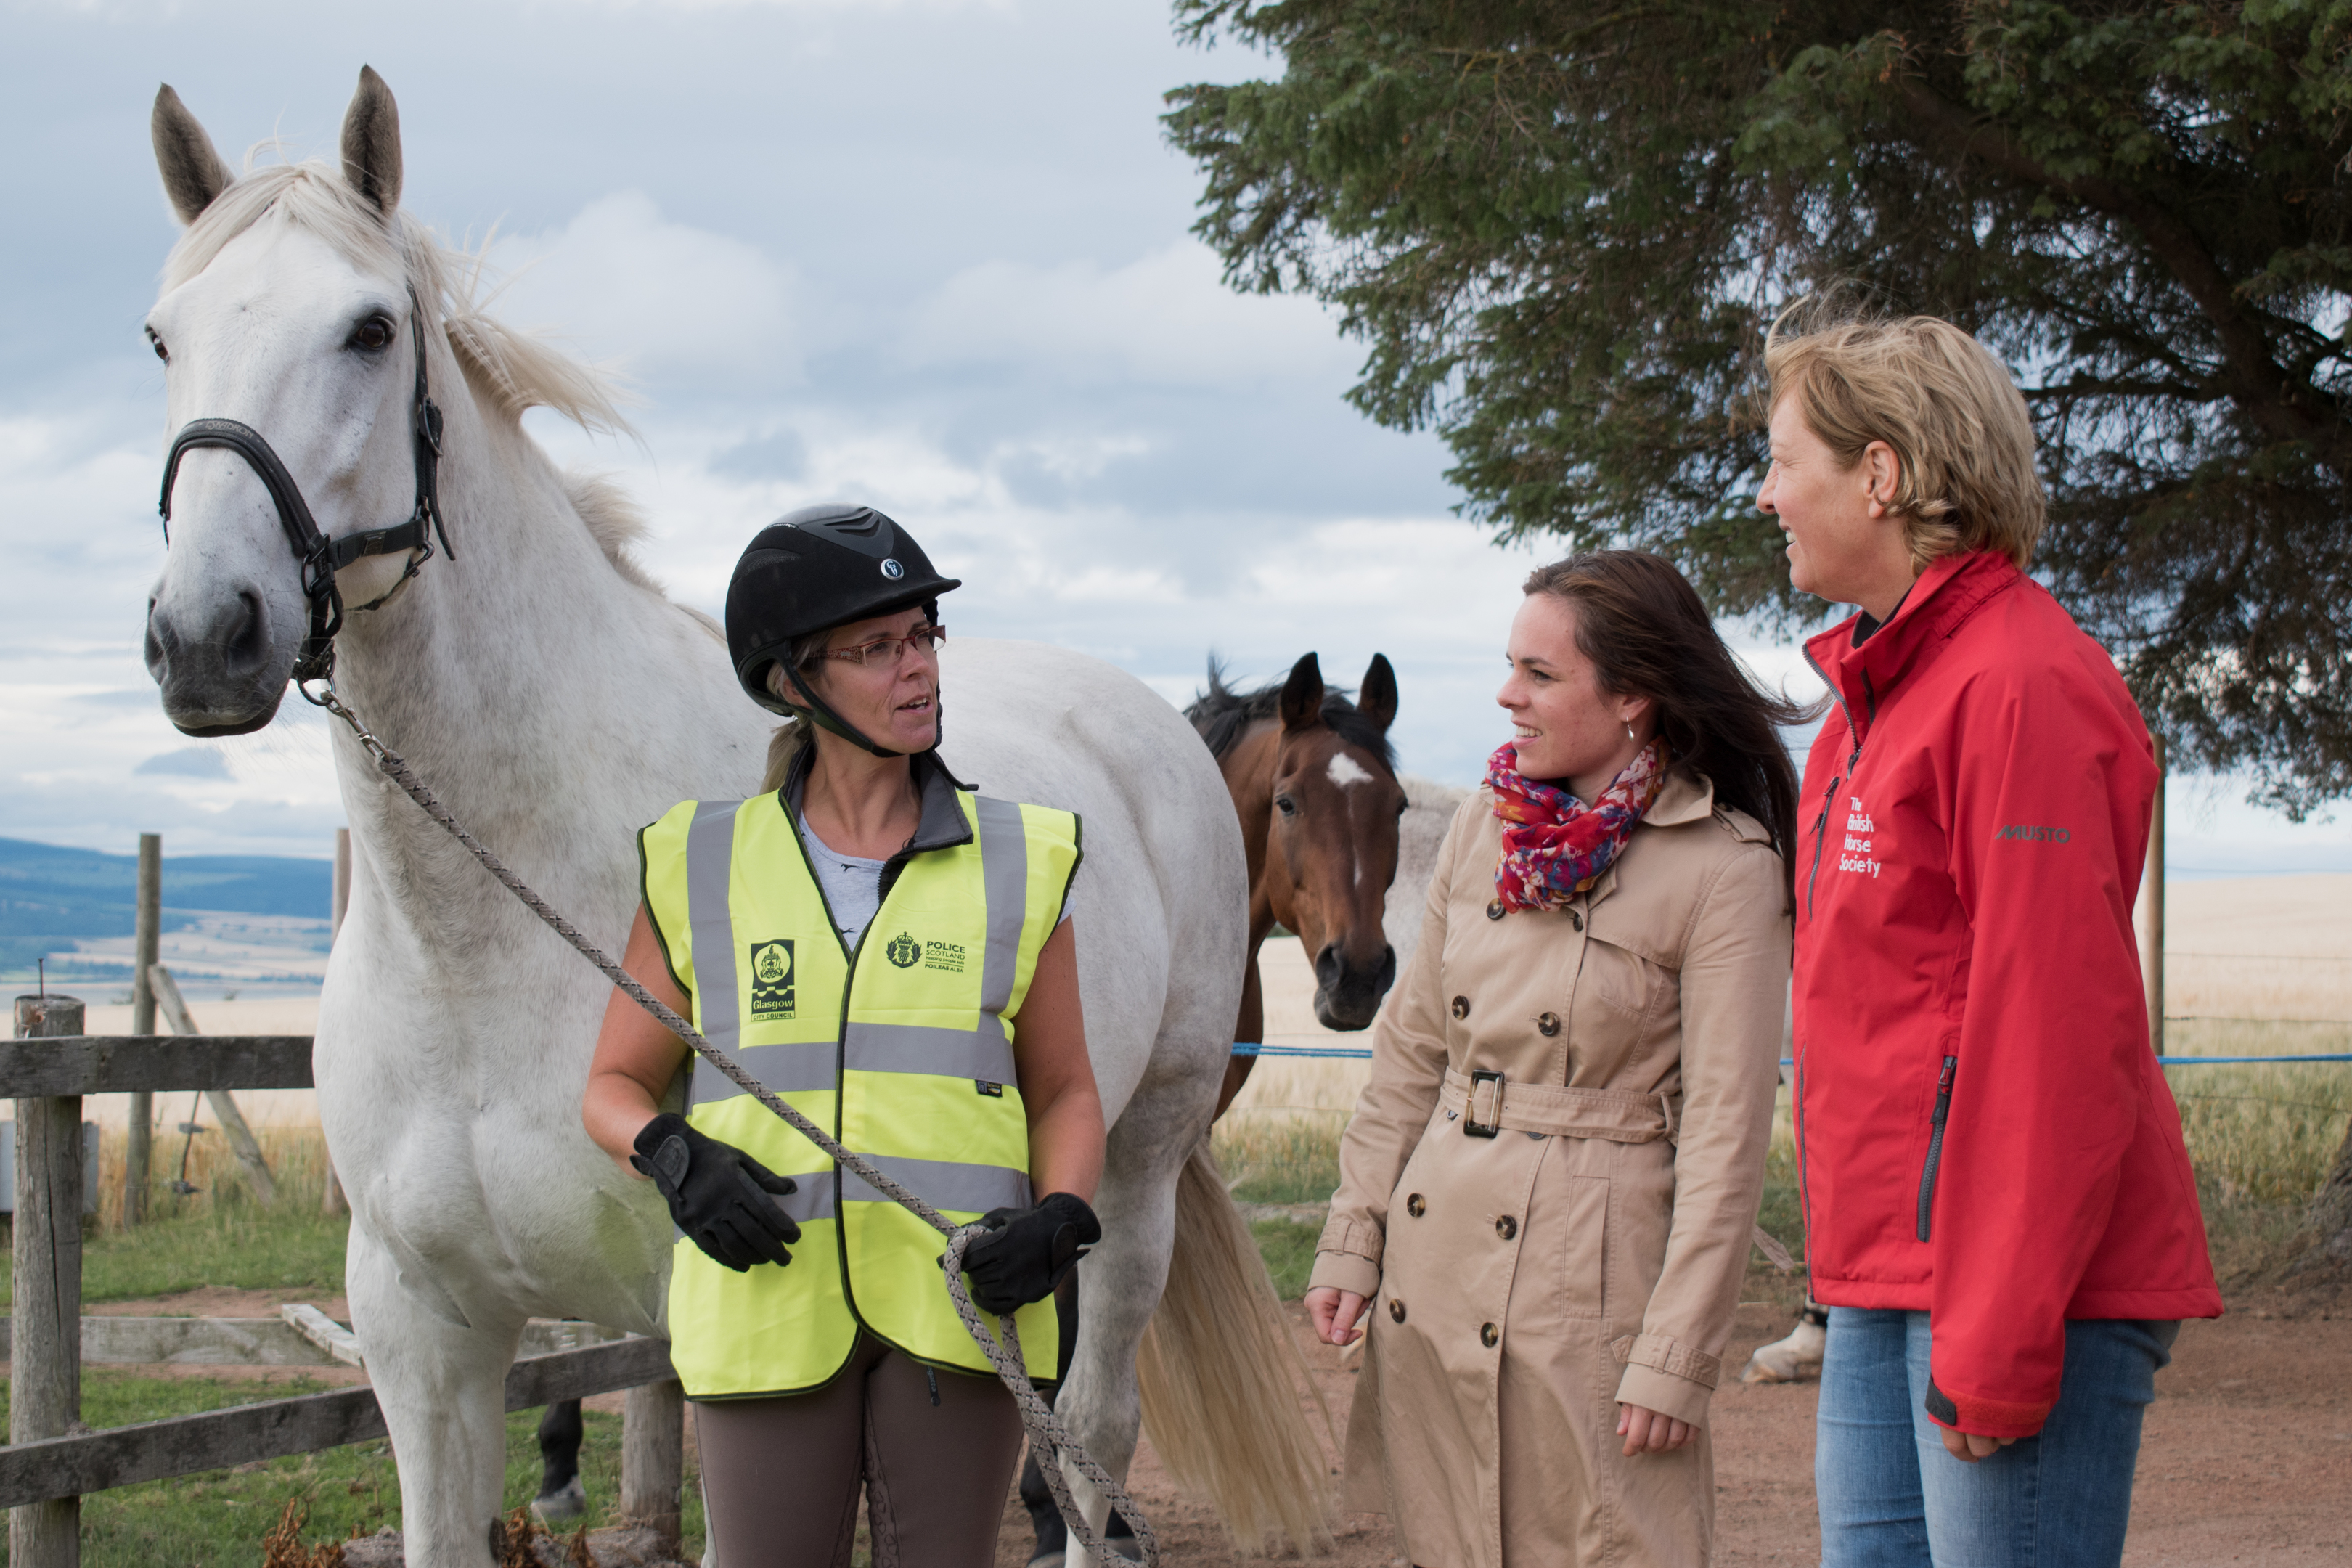 Kate Forbes MSP met with Black Isle horse riders to discuss safety measures in August